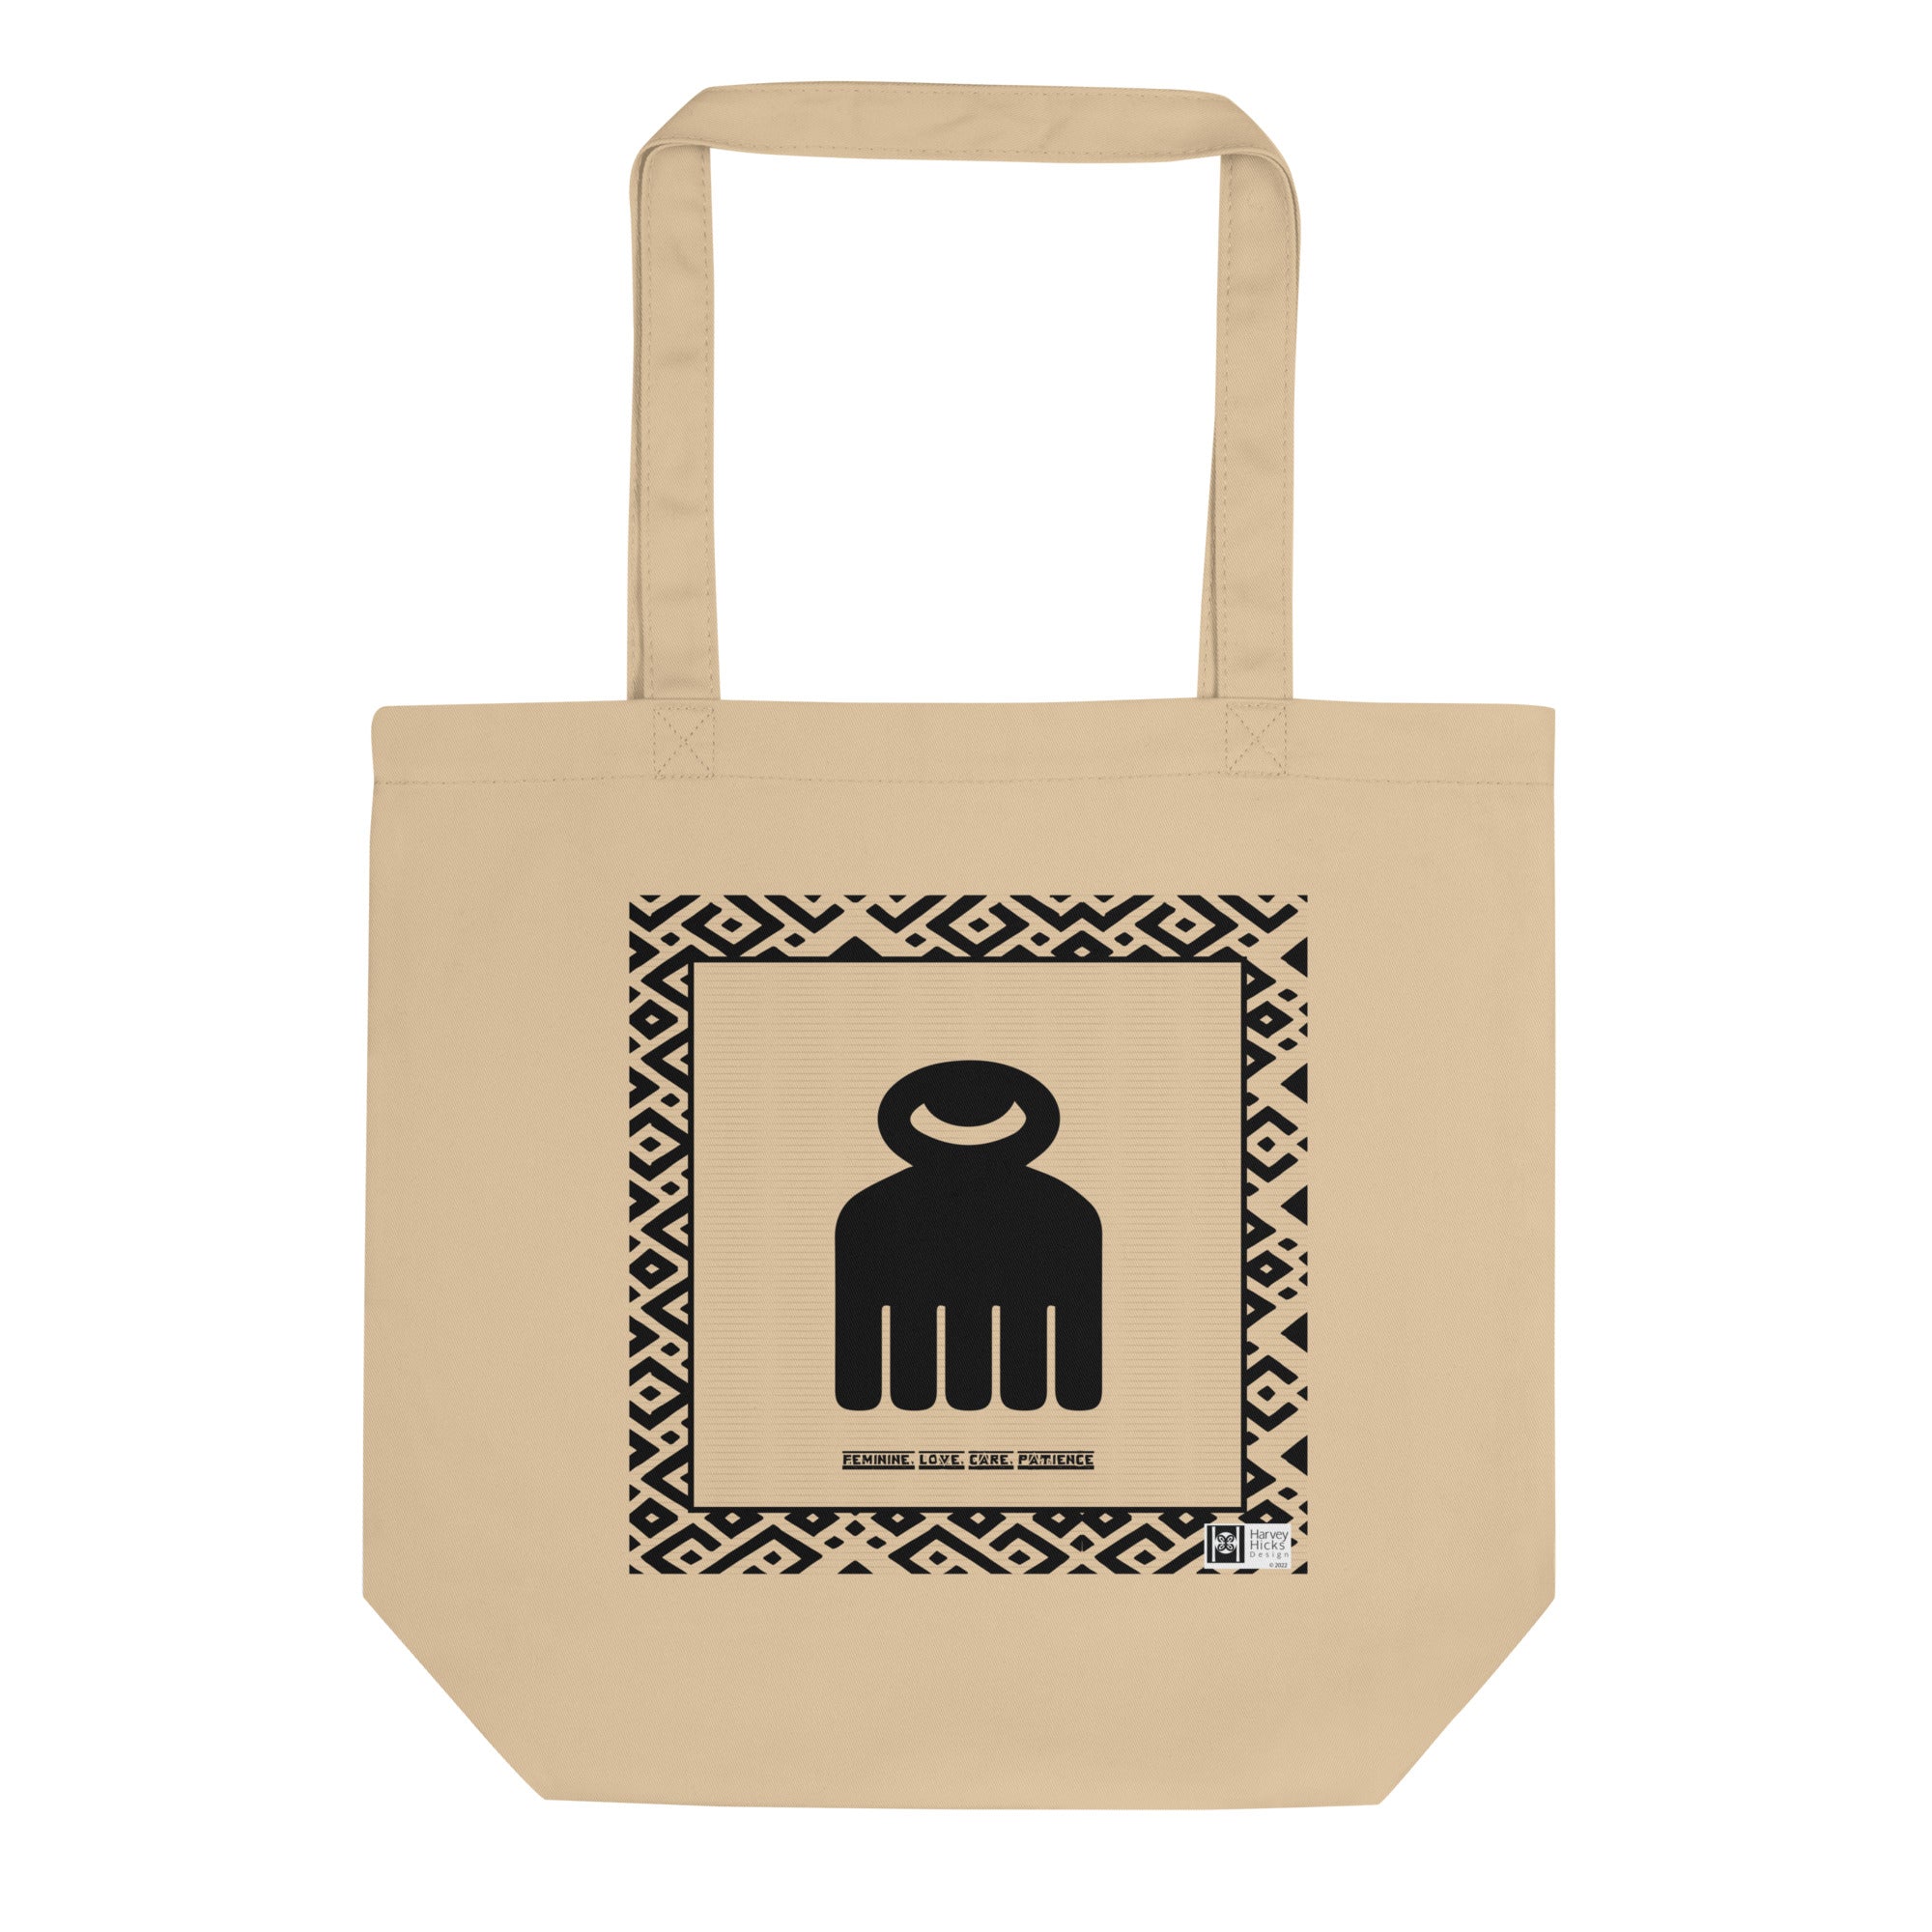 100% cotton Eco Tote Bag, featuring the Adinkra symbol, wooden comb